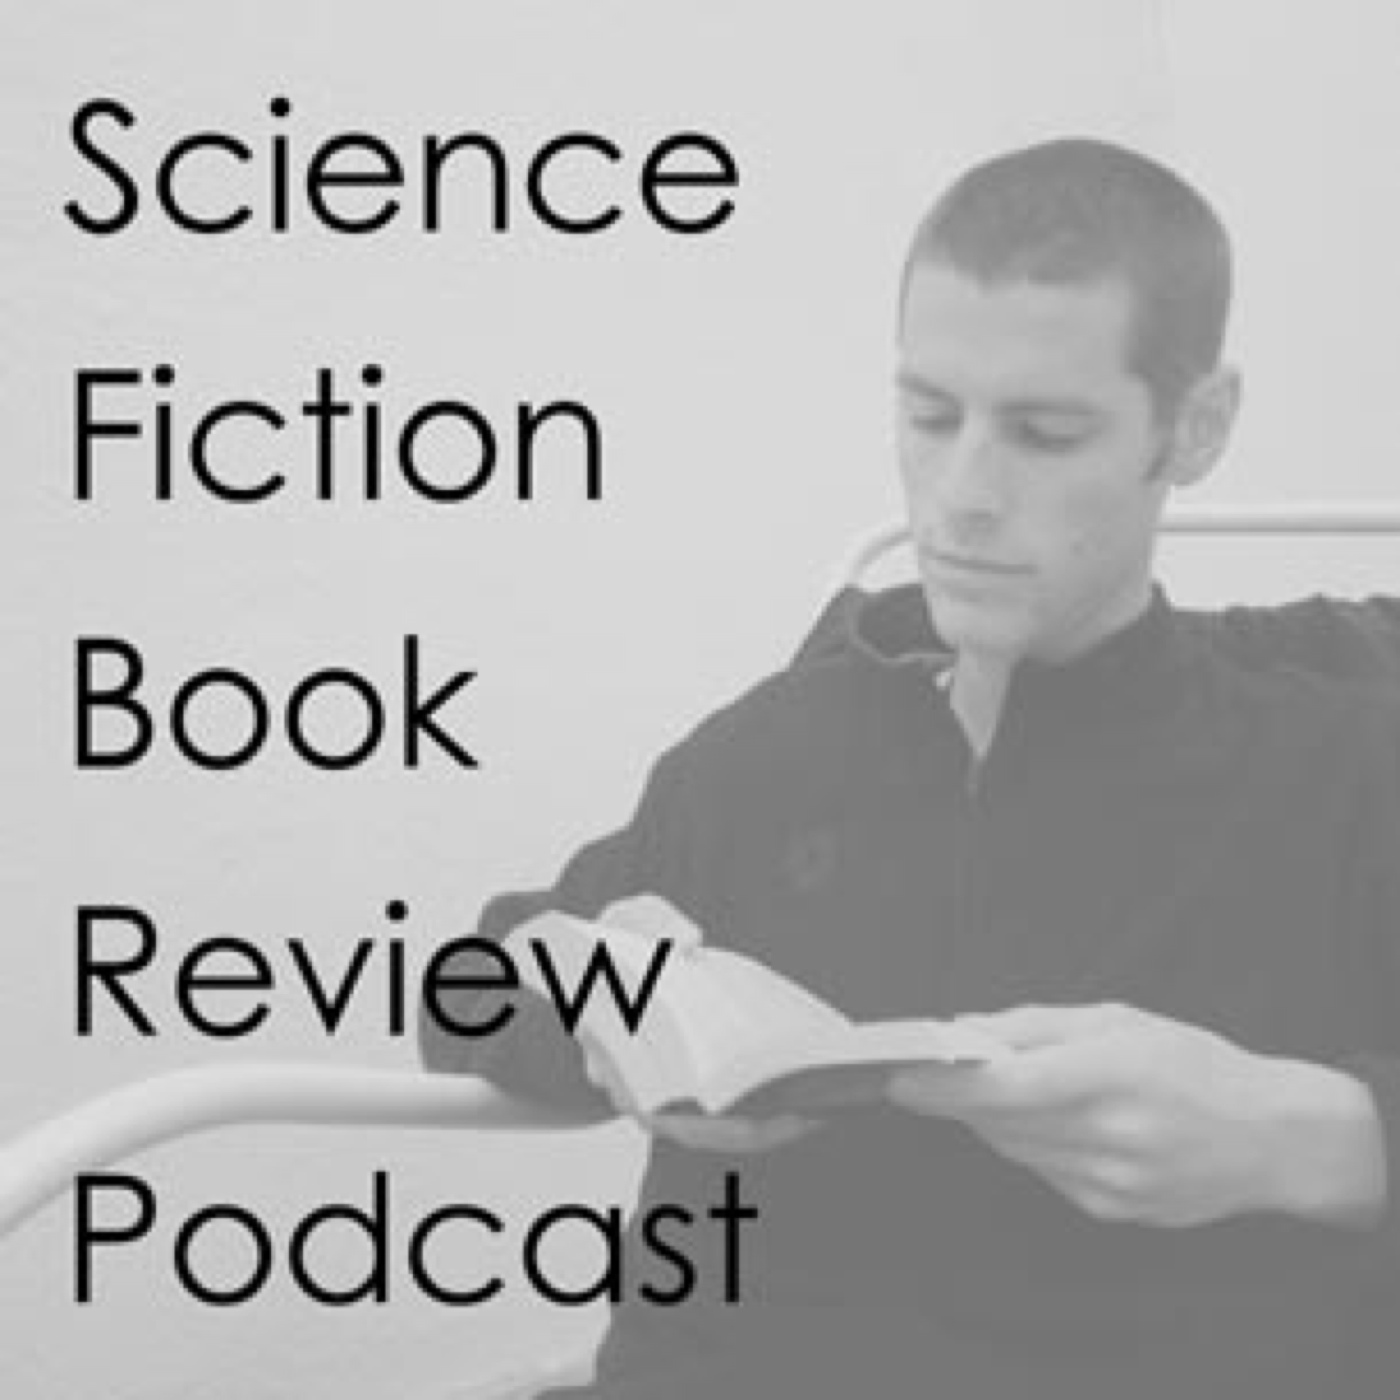 Science Fiction Book Review Podcast artwork